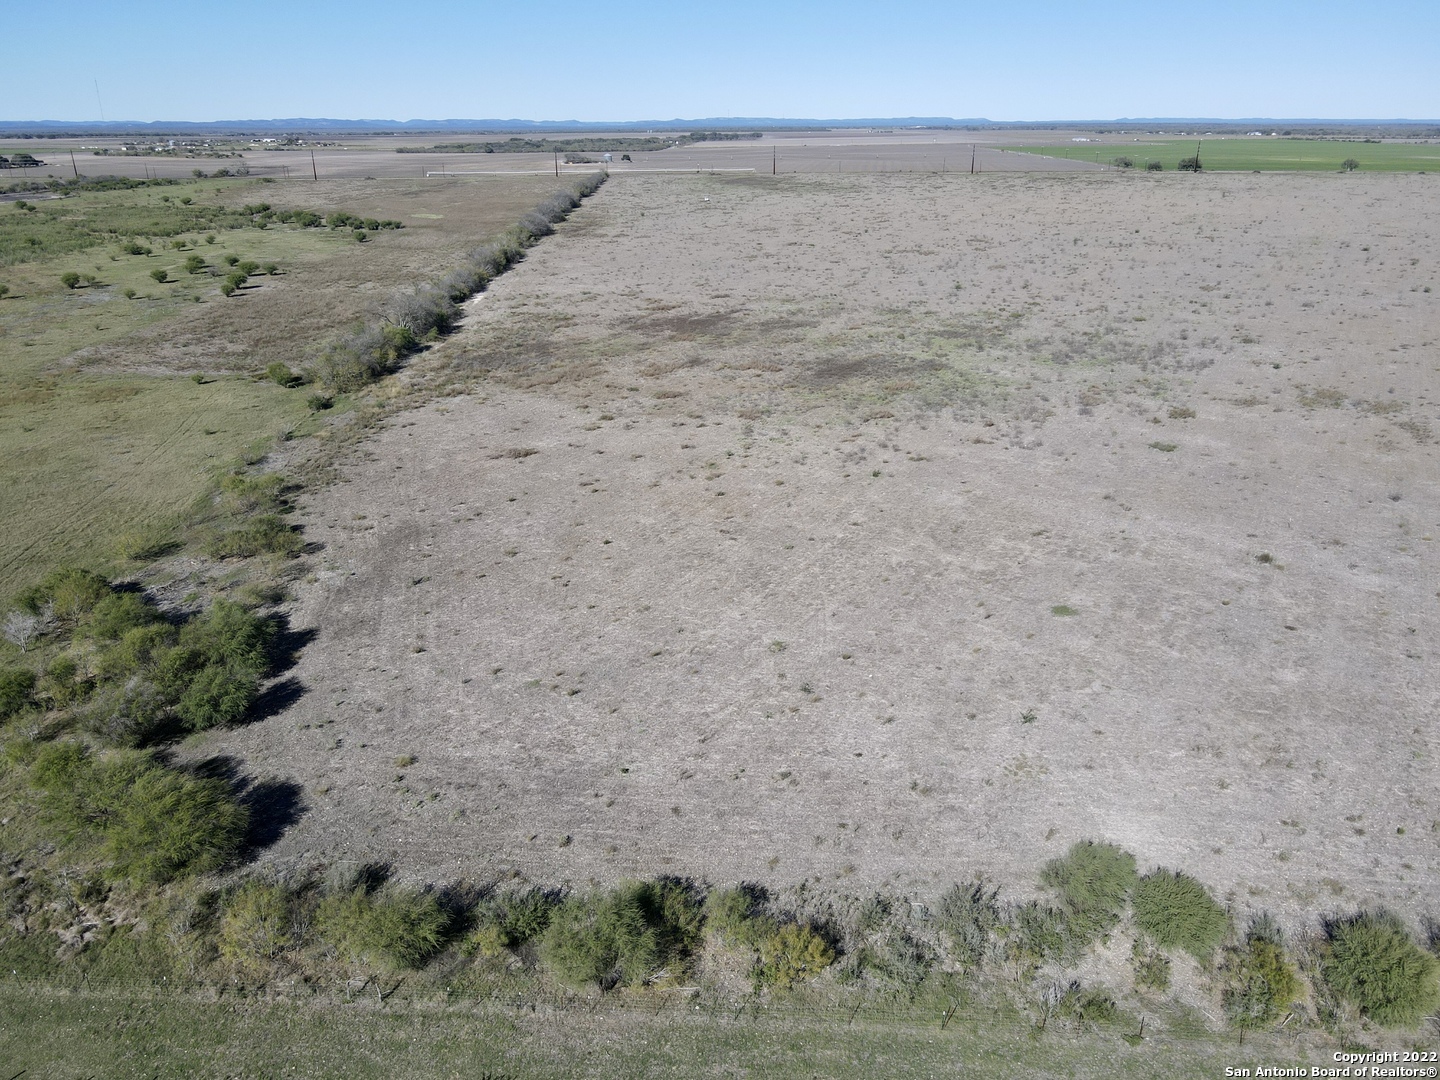 TBD TRACT K COUNTY ROAD 512, Dhanis, TX 78850